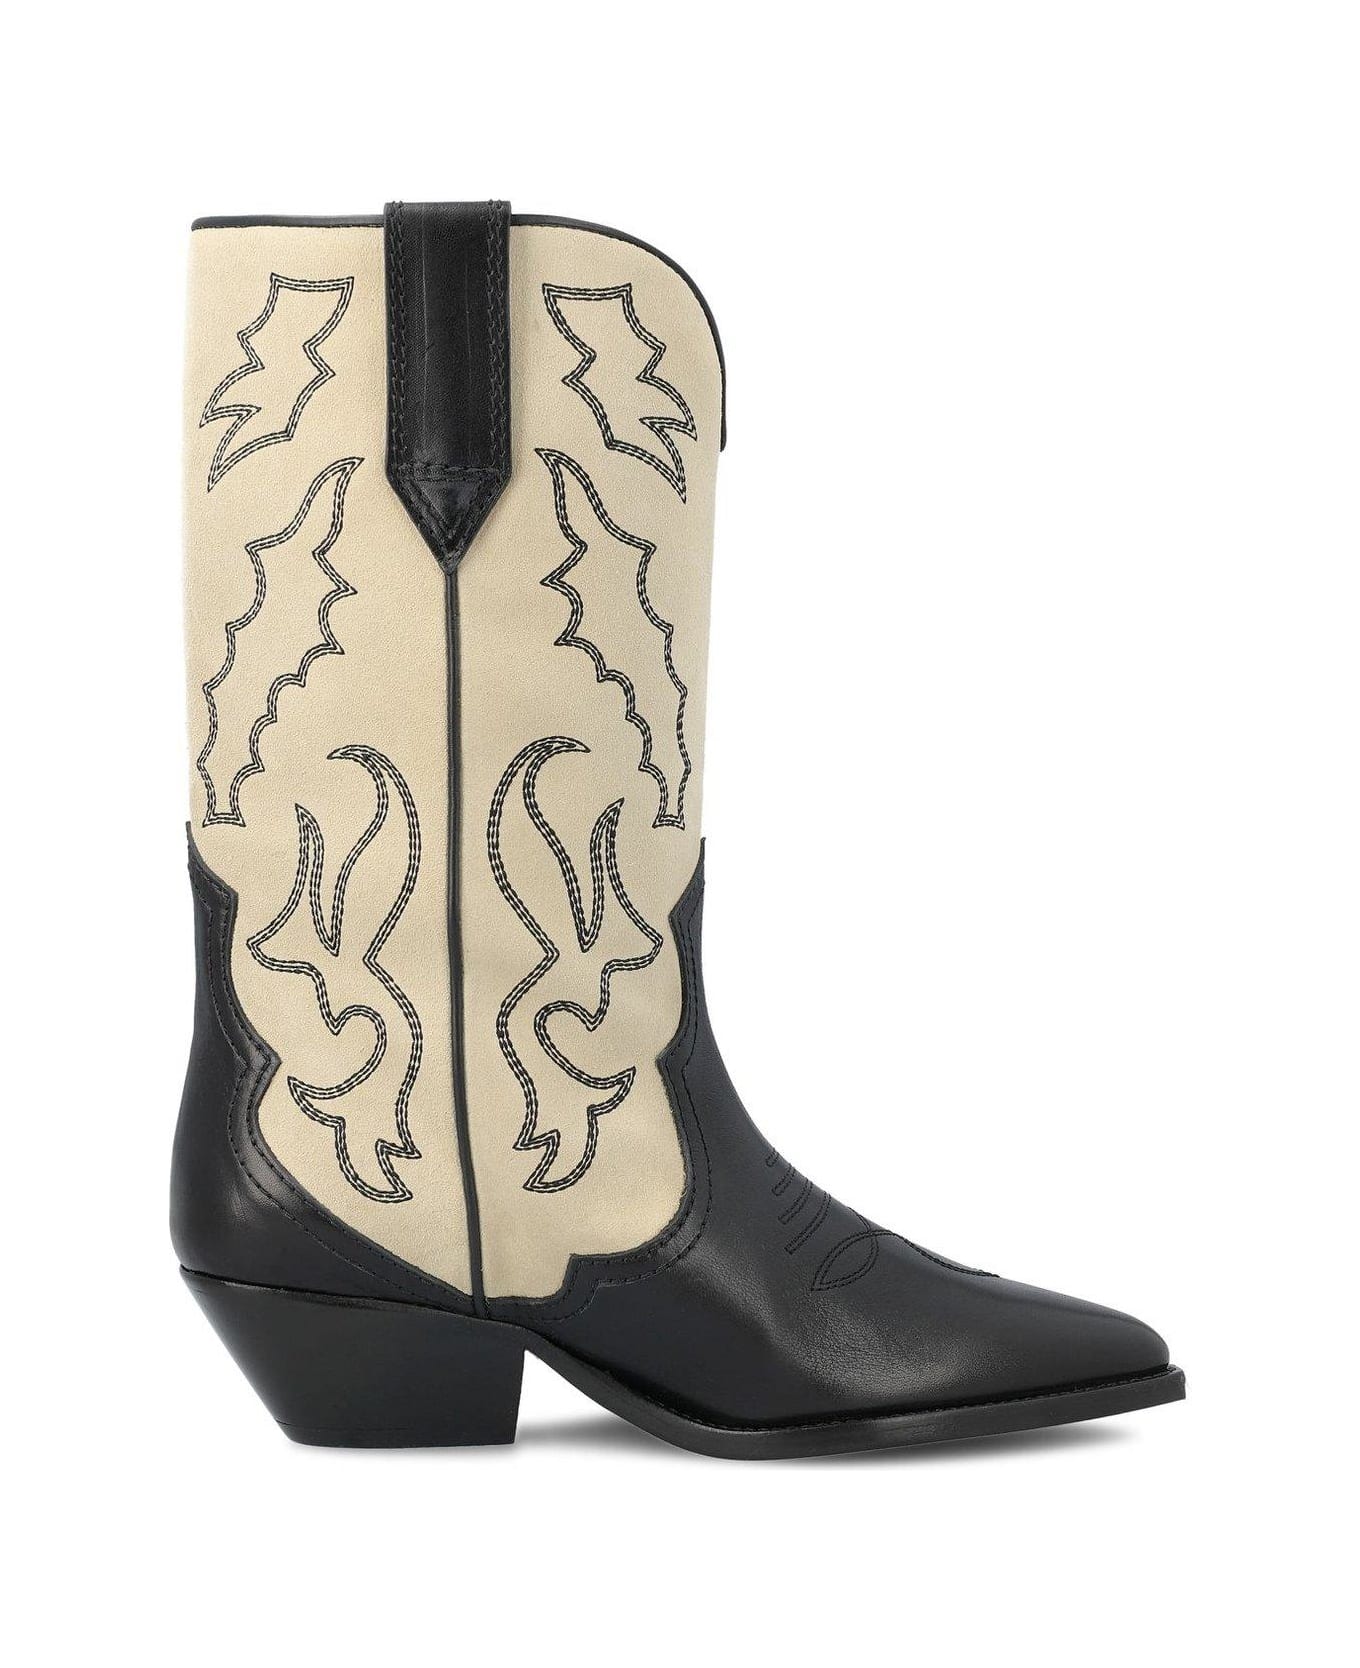 Isabel Marant Duerto Western-style Ankle Boots - Black ブーツ